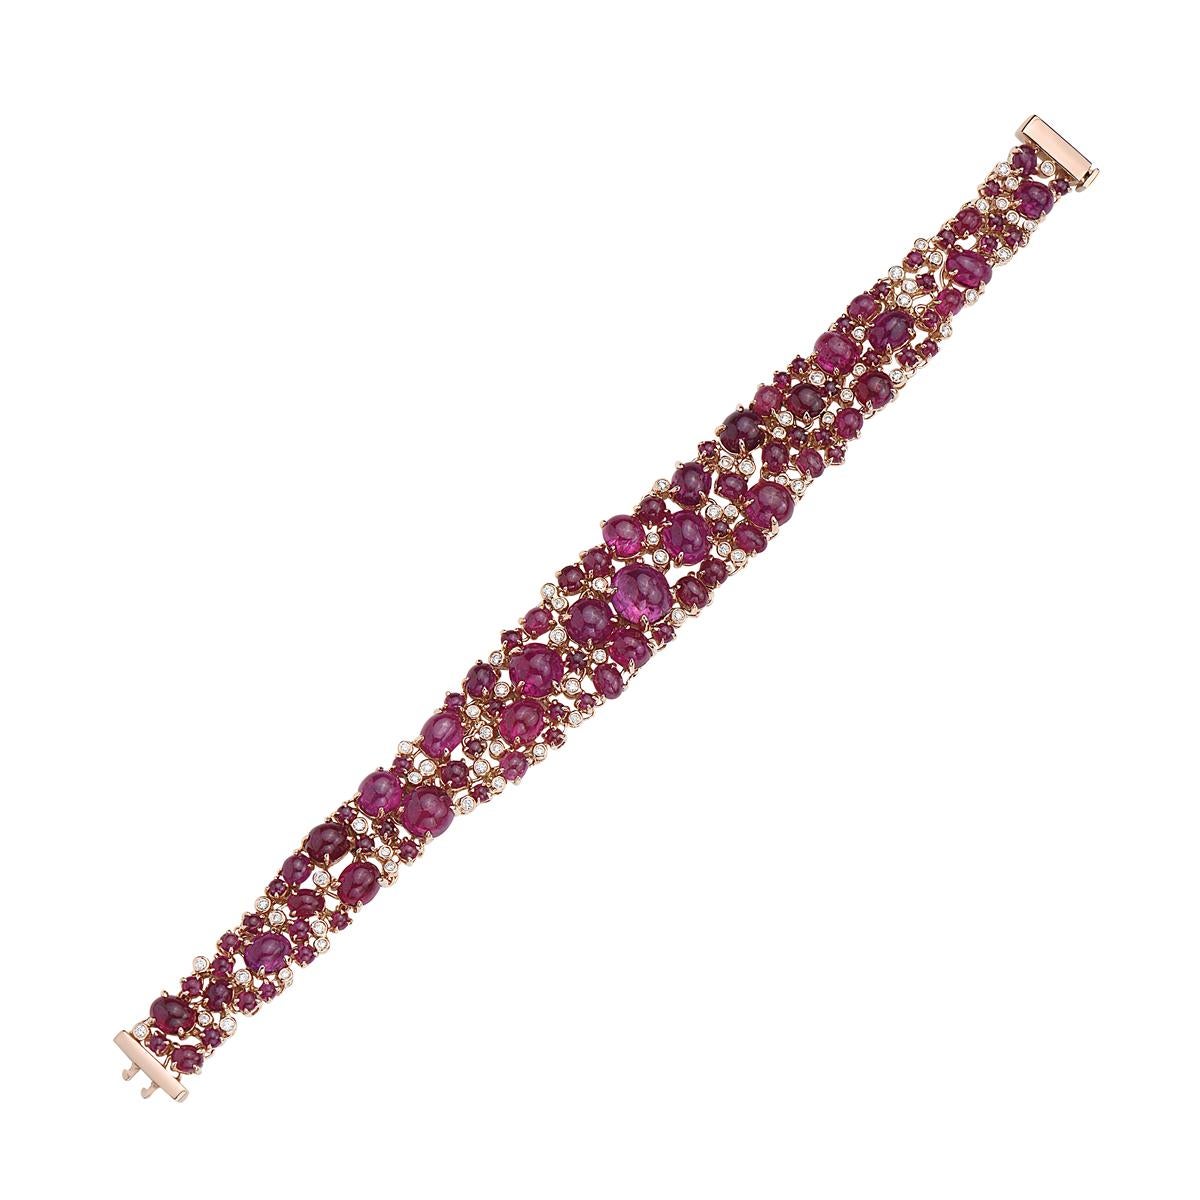 This bracelet features 54.65 carats of Cabochon ruby weighing 49.4 grams and 0.82 carats of diamonds set in 18K rose gold. Double prong closure. 7.5 inches long.

Viewings available in our NYC showroom by appointment.